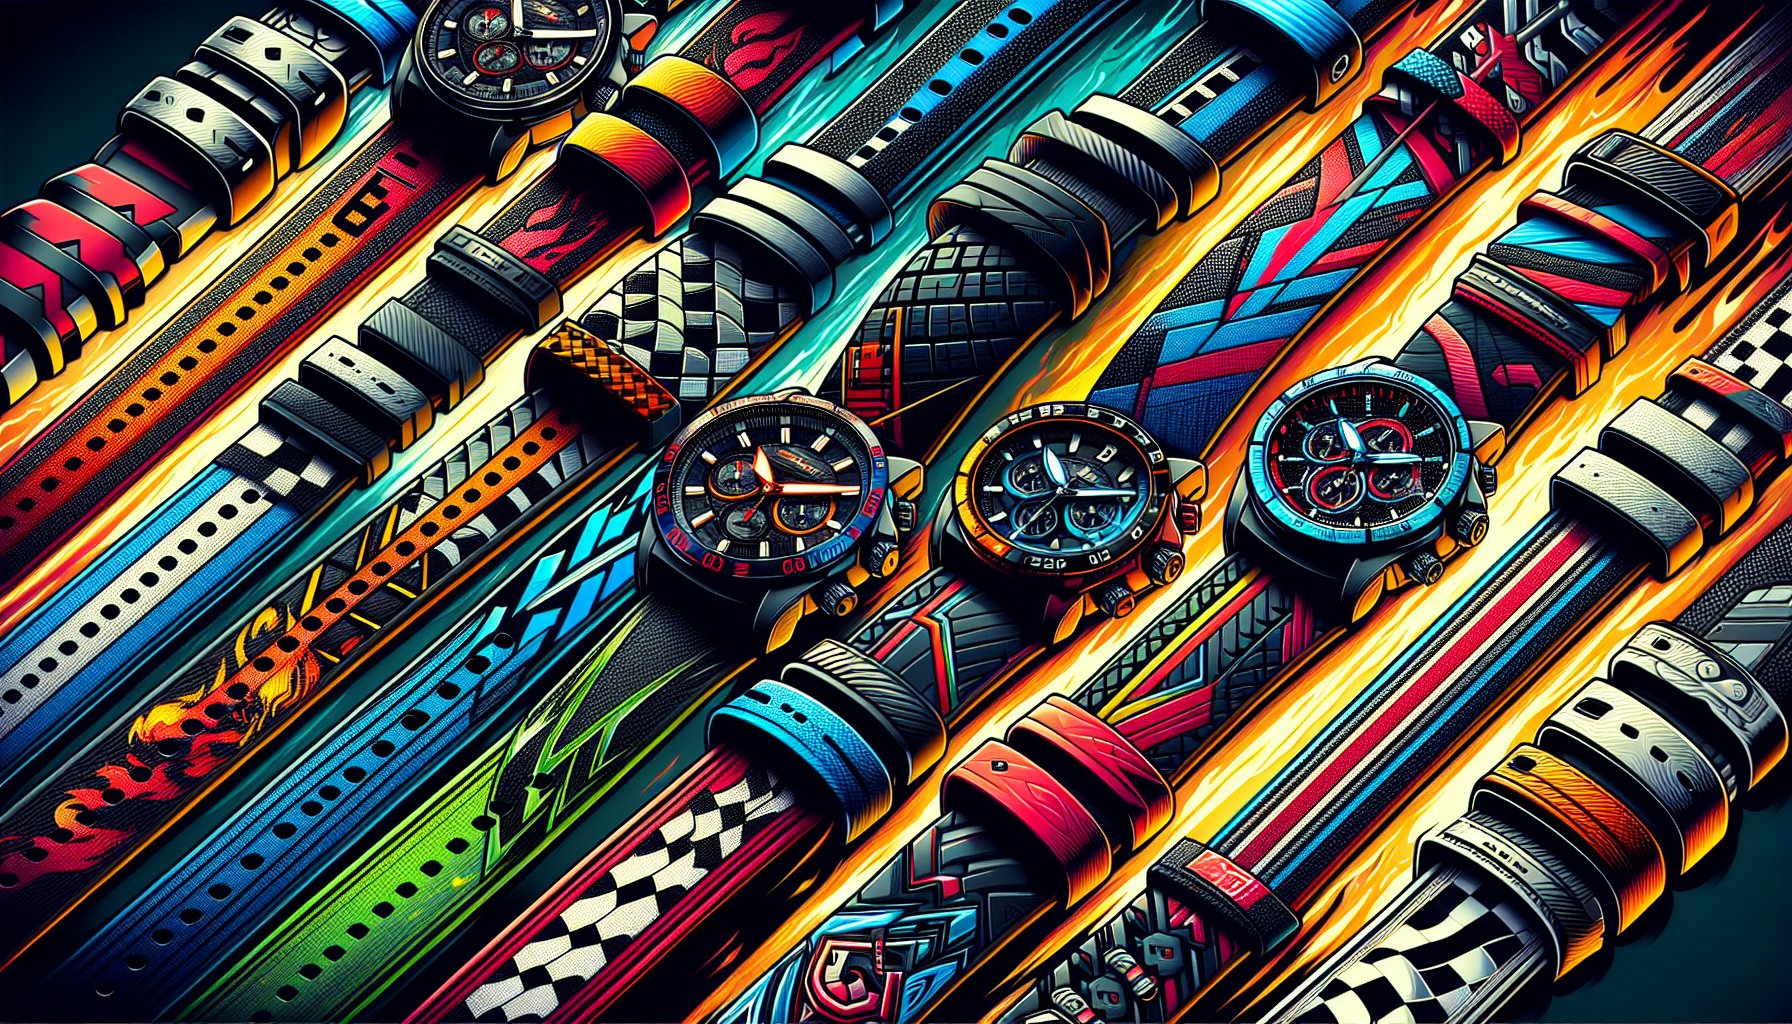 Illustration of stylish racing watch bands in various colors